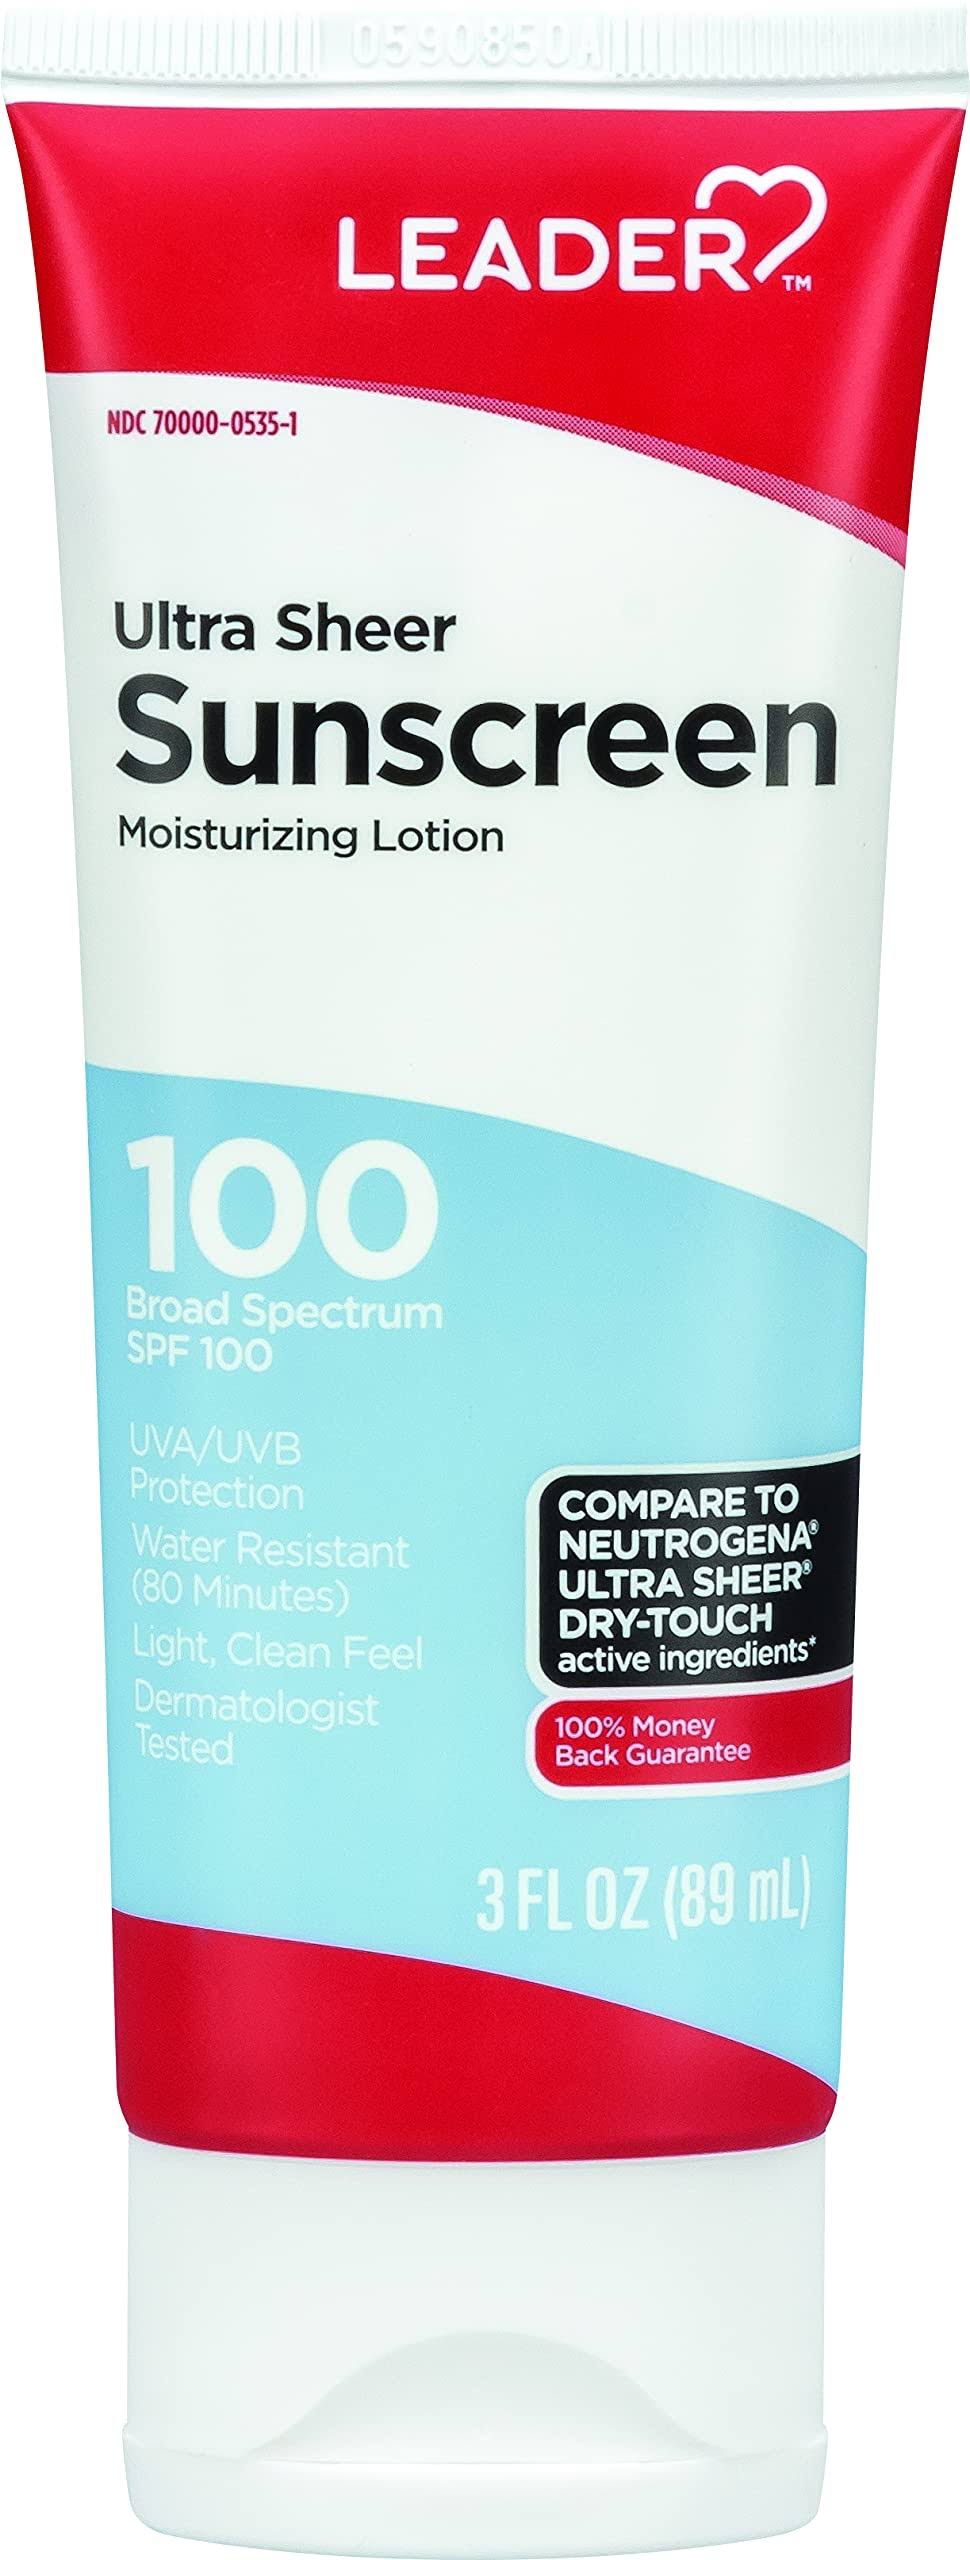 Leader SPF 100+ Sunscreen Lotion Ultra Sheer Dry-Touch Water Resistant Non-Greasy with Broad Spectrum Sunblock, Waterproof 3 Fl Oz